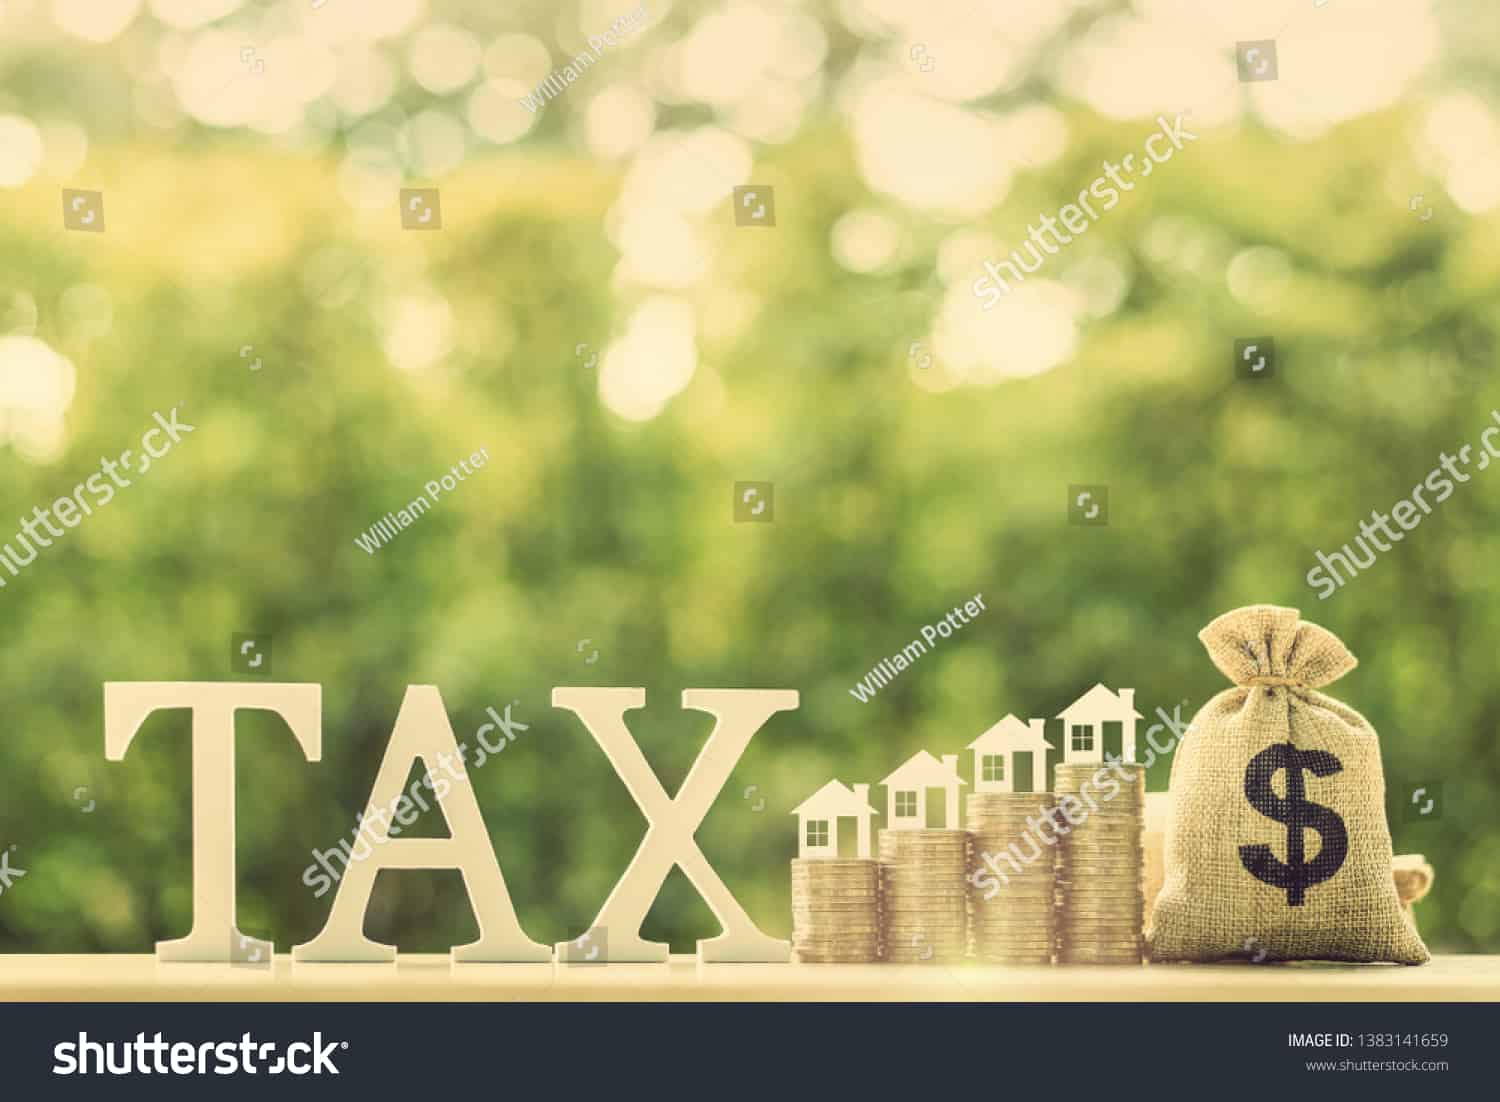 stock-photo-house-or-building-or-land-value-property-tax-local-development-tax-concept-word-tax-home-1383141659